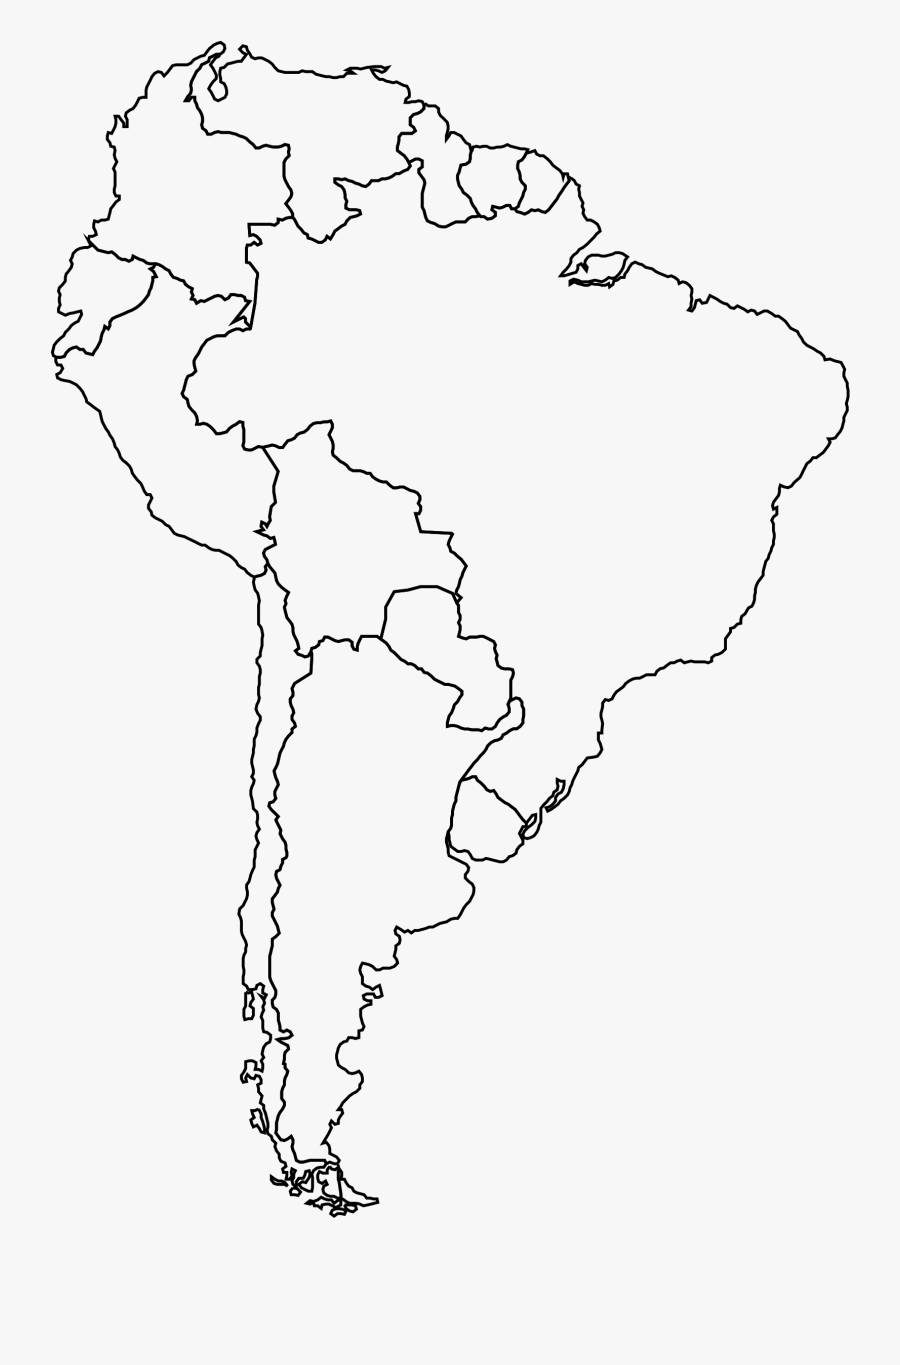 South America Blank Map Free Transparent Clipart ClipartKey